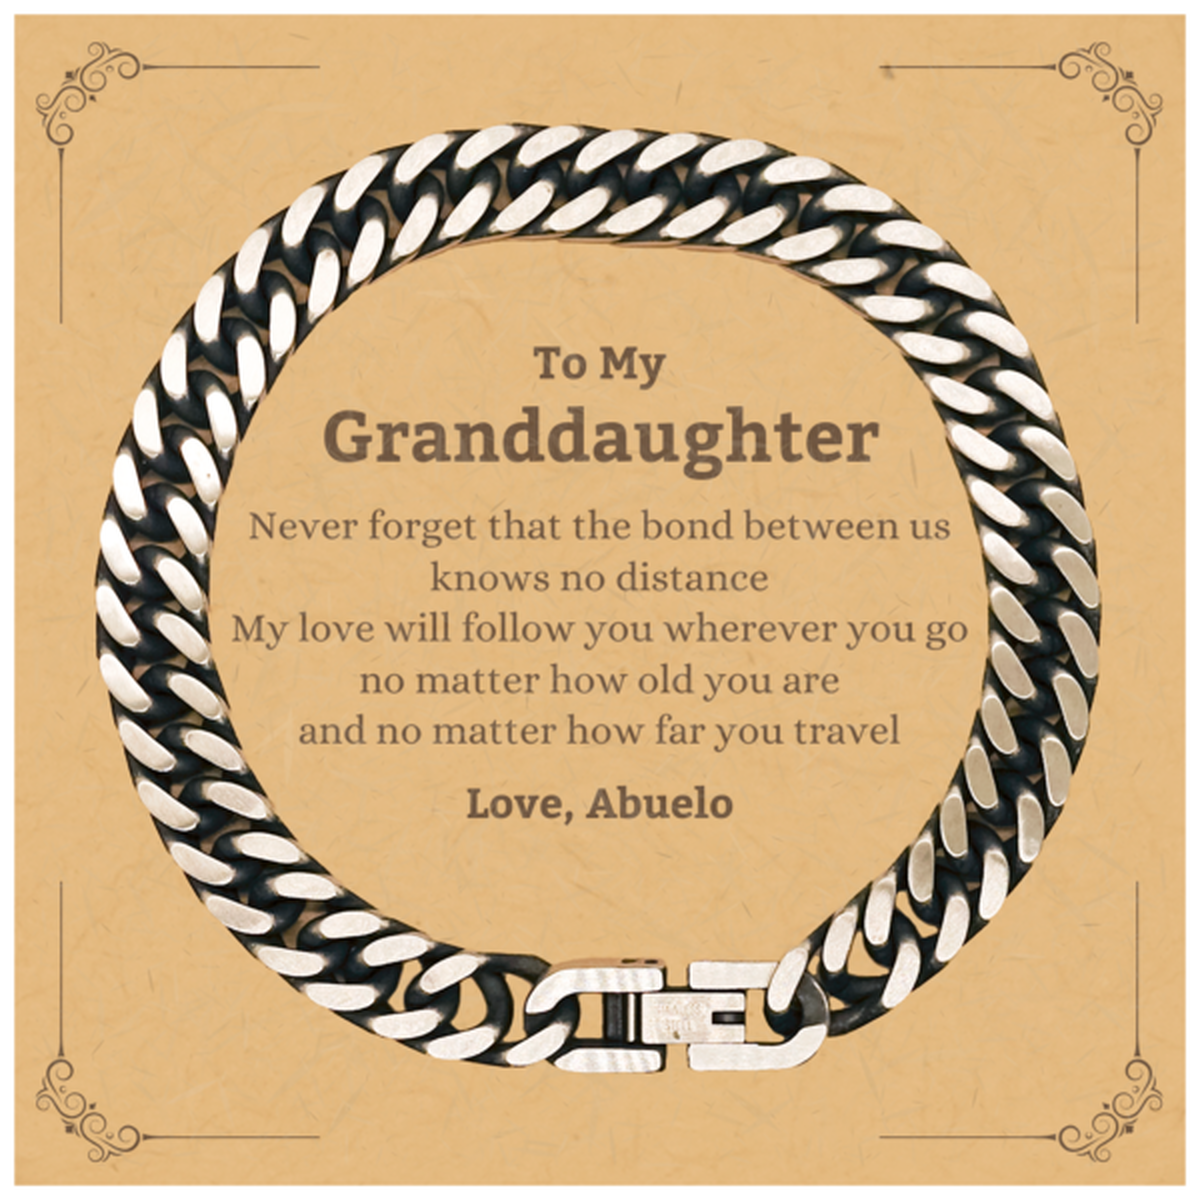 Granddaughter Birthday Gifts from Abuelo, Adjustable Cuban Link Chain Bracelet for Granddaughter Christmas Graduation Unique Gifts Granddaughter Never forget that the bond between us knows no distance. Love, Abuelo